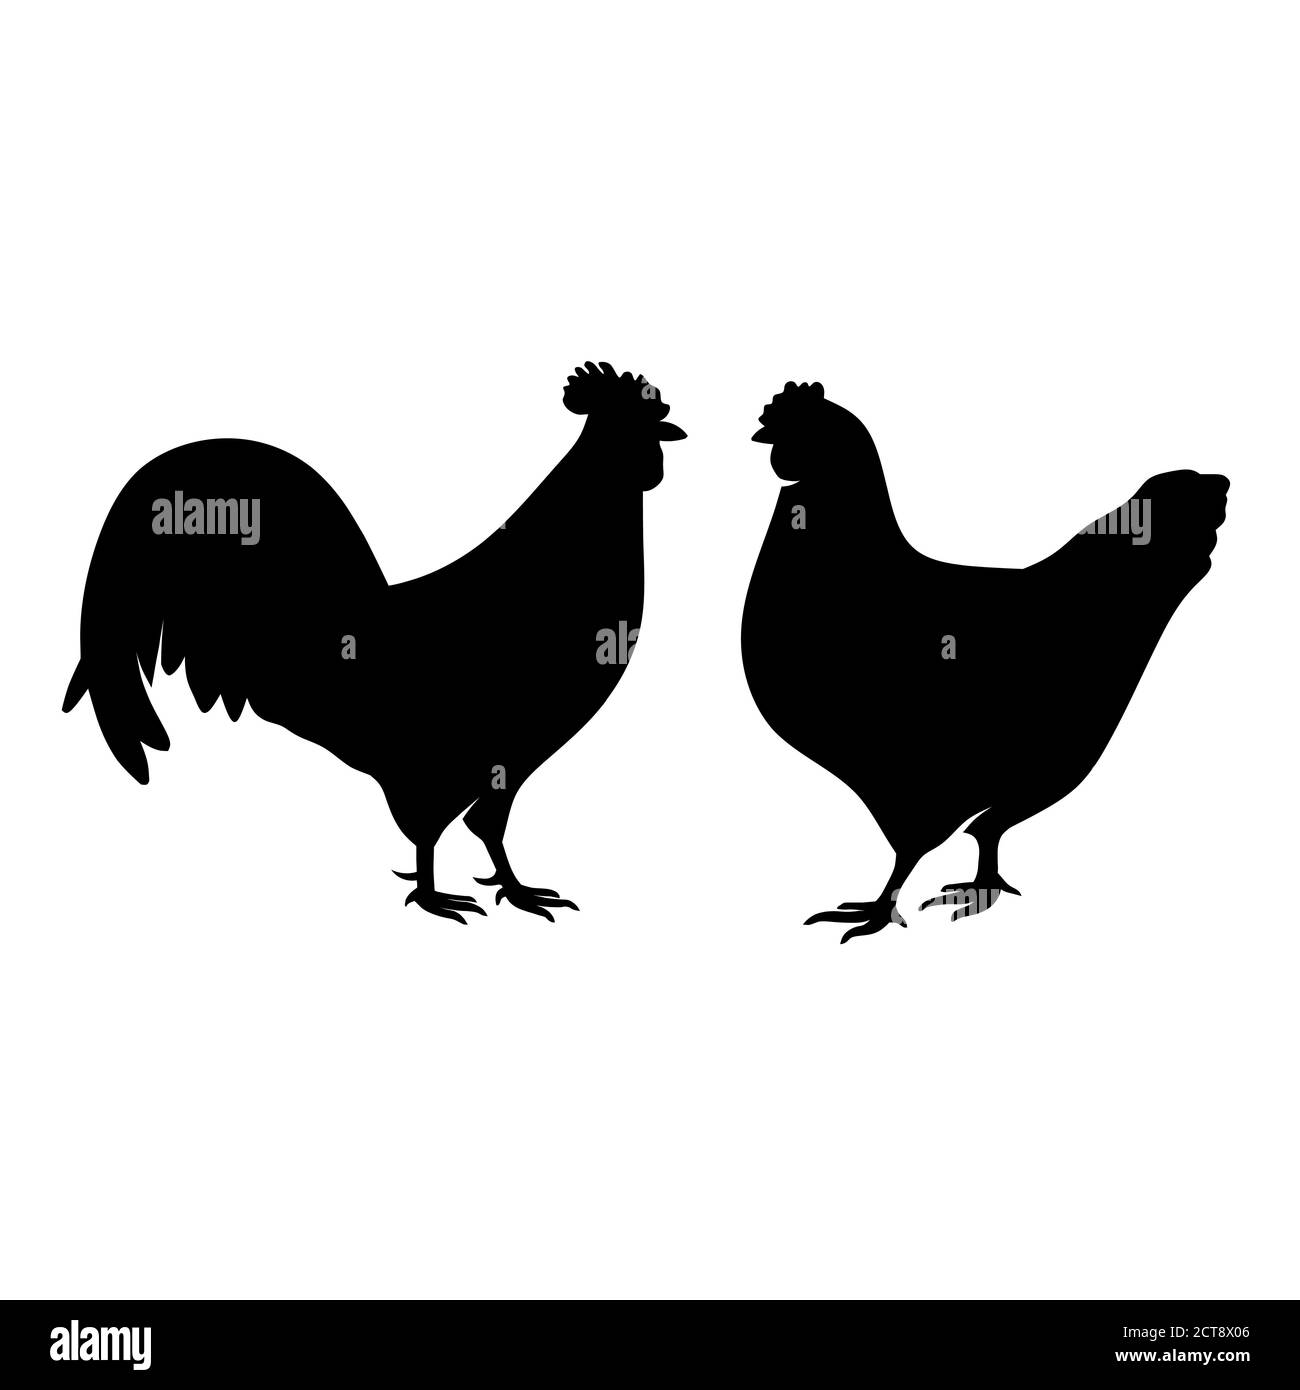 Farm animal silhouette in black on a white background ,chicken Silhouettes isolated on white vector Stock Vector